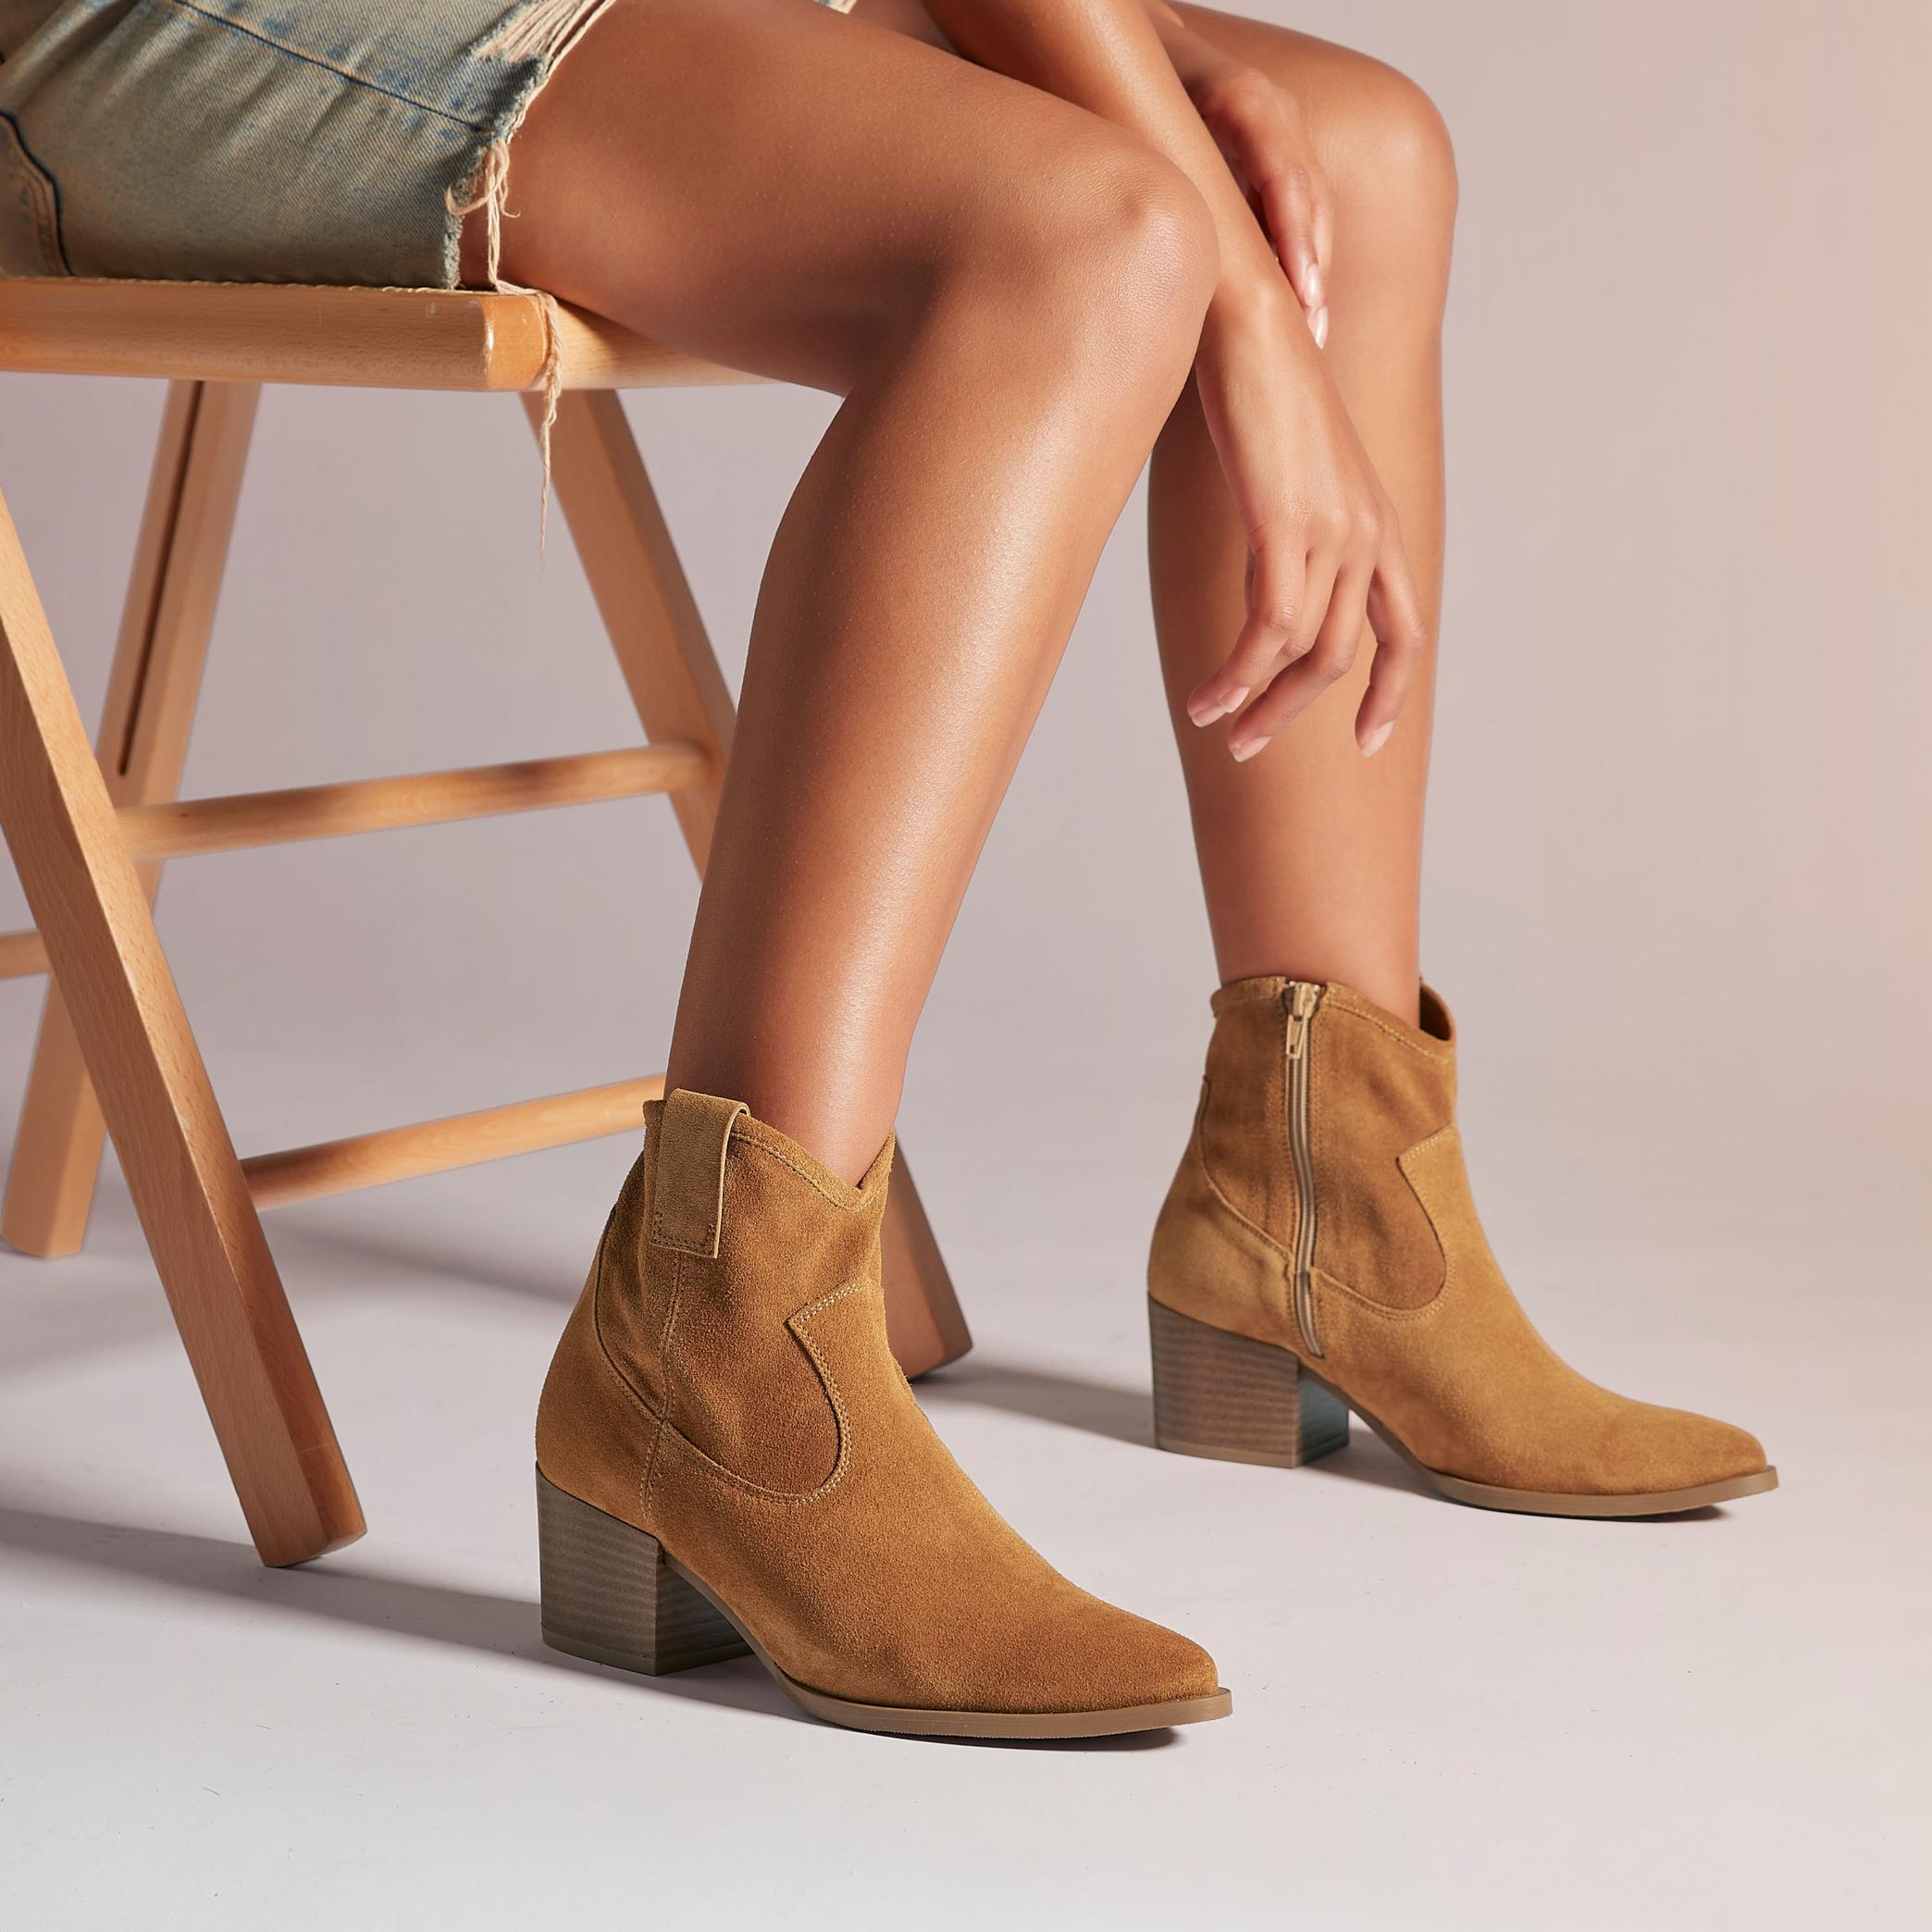 Elder Rae Tan Suede Ankle Boots, view 2 of 7